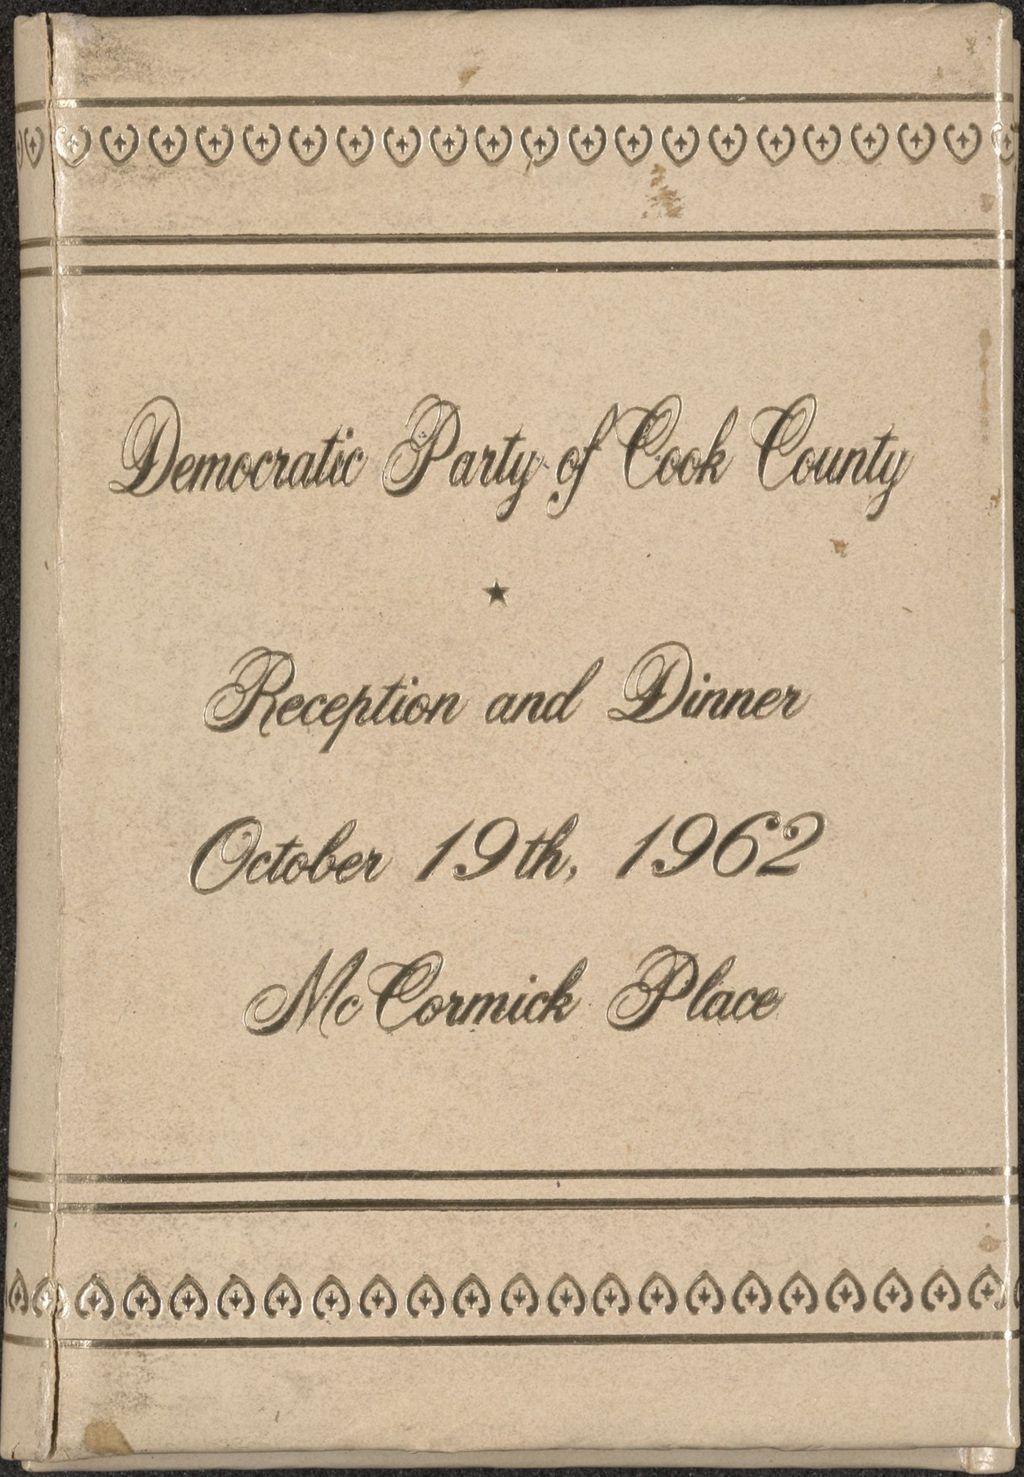 Miniature of Democratic Party of Cook County Reception and Dinner photo album